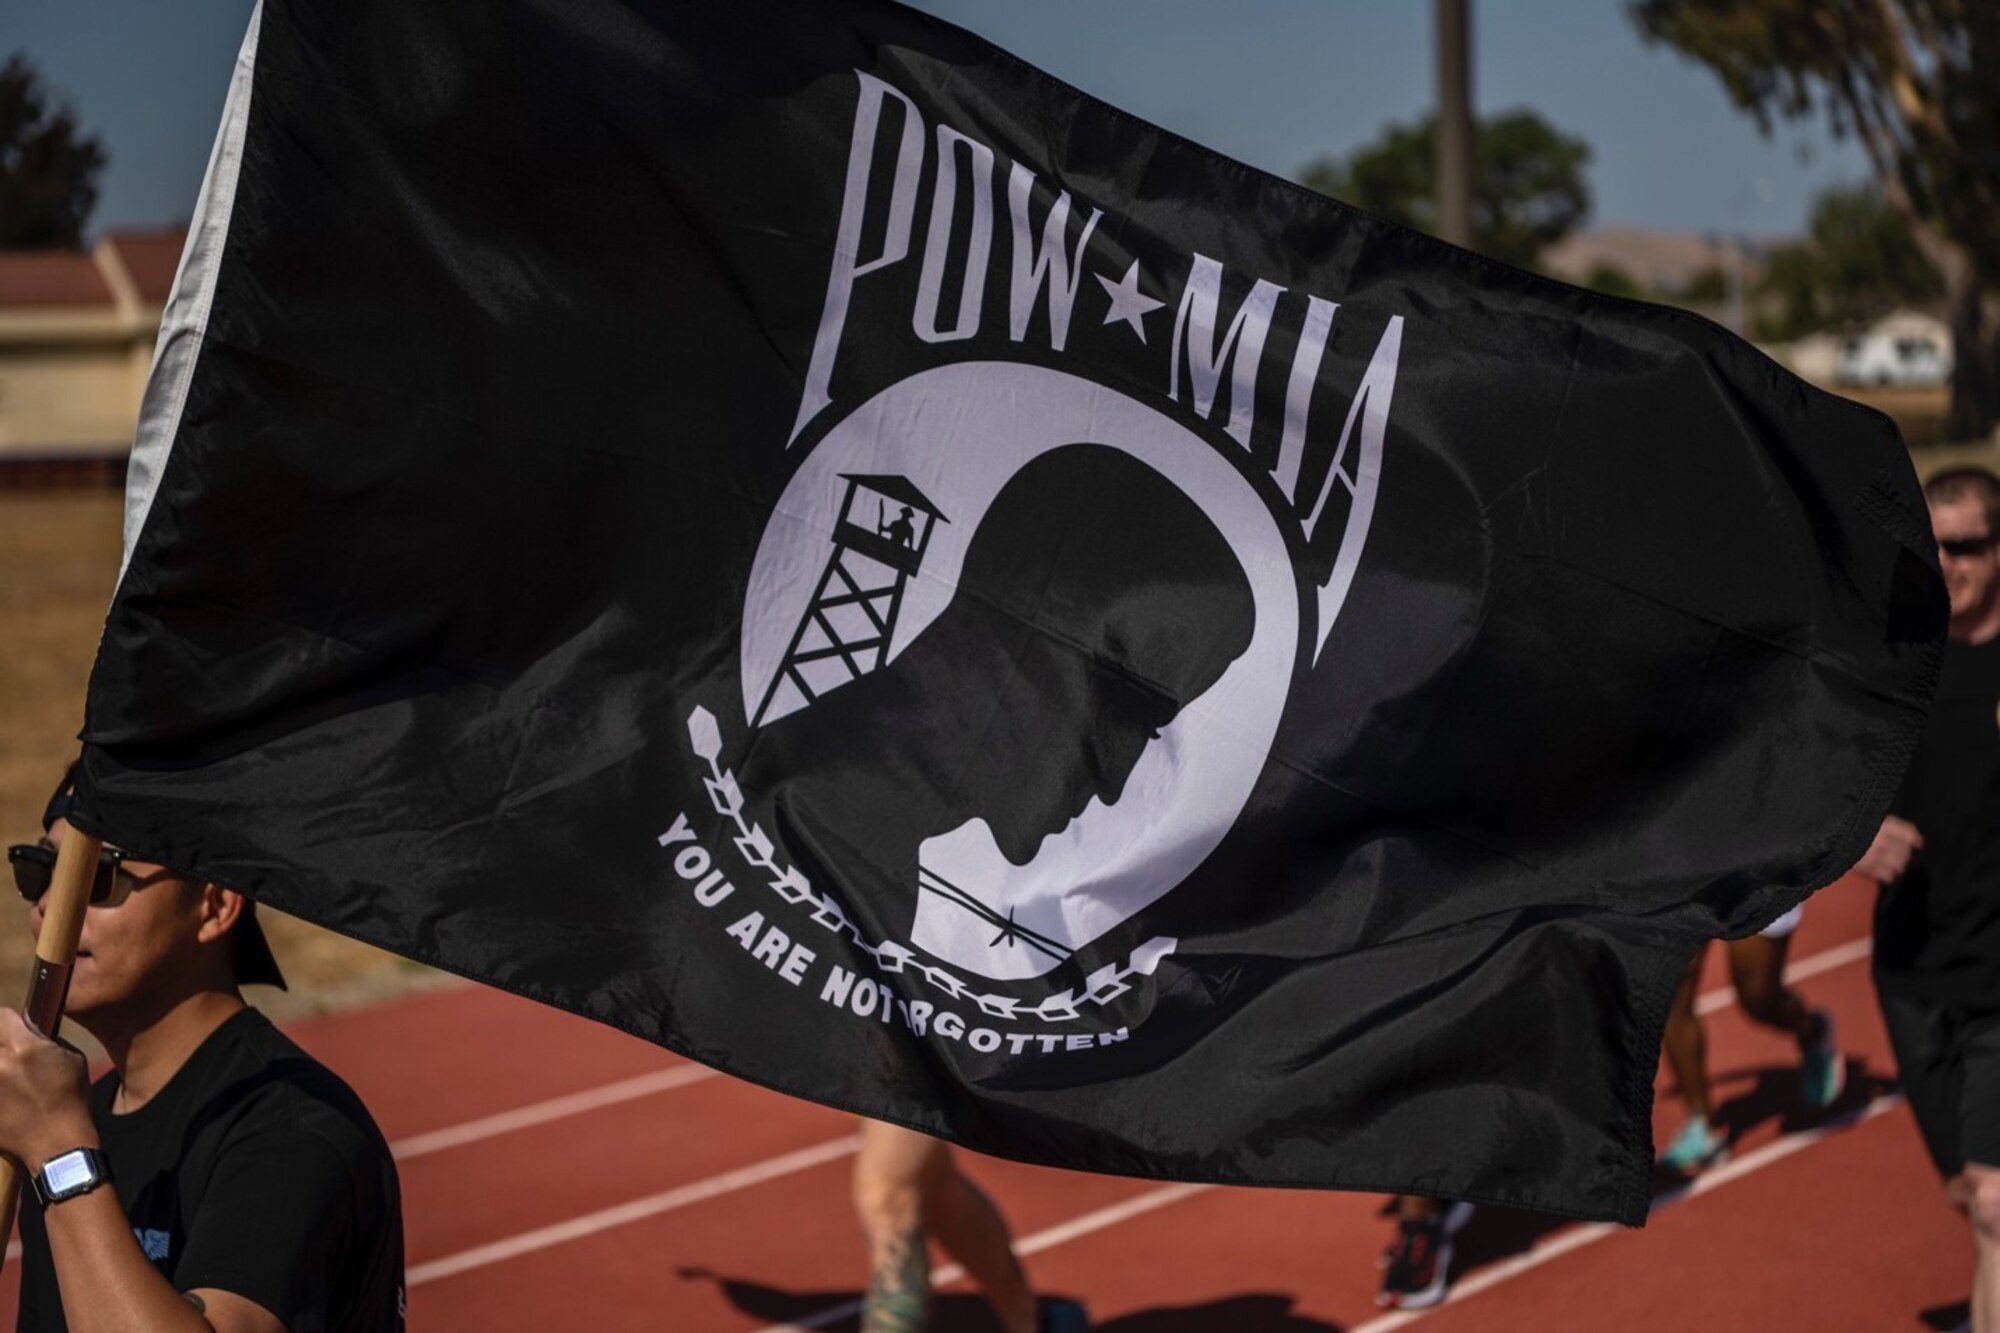 A man in a black shirt carries the POW/MIA flag while running on a sunny day